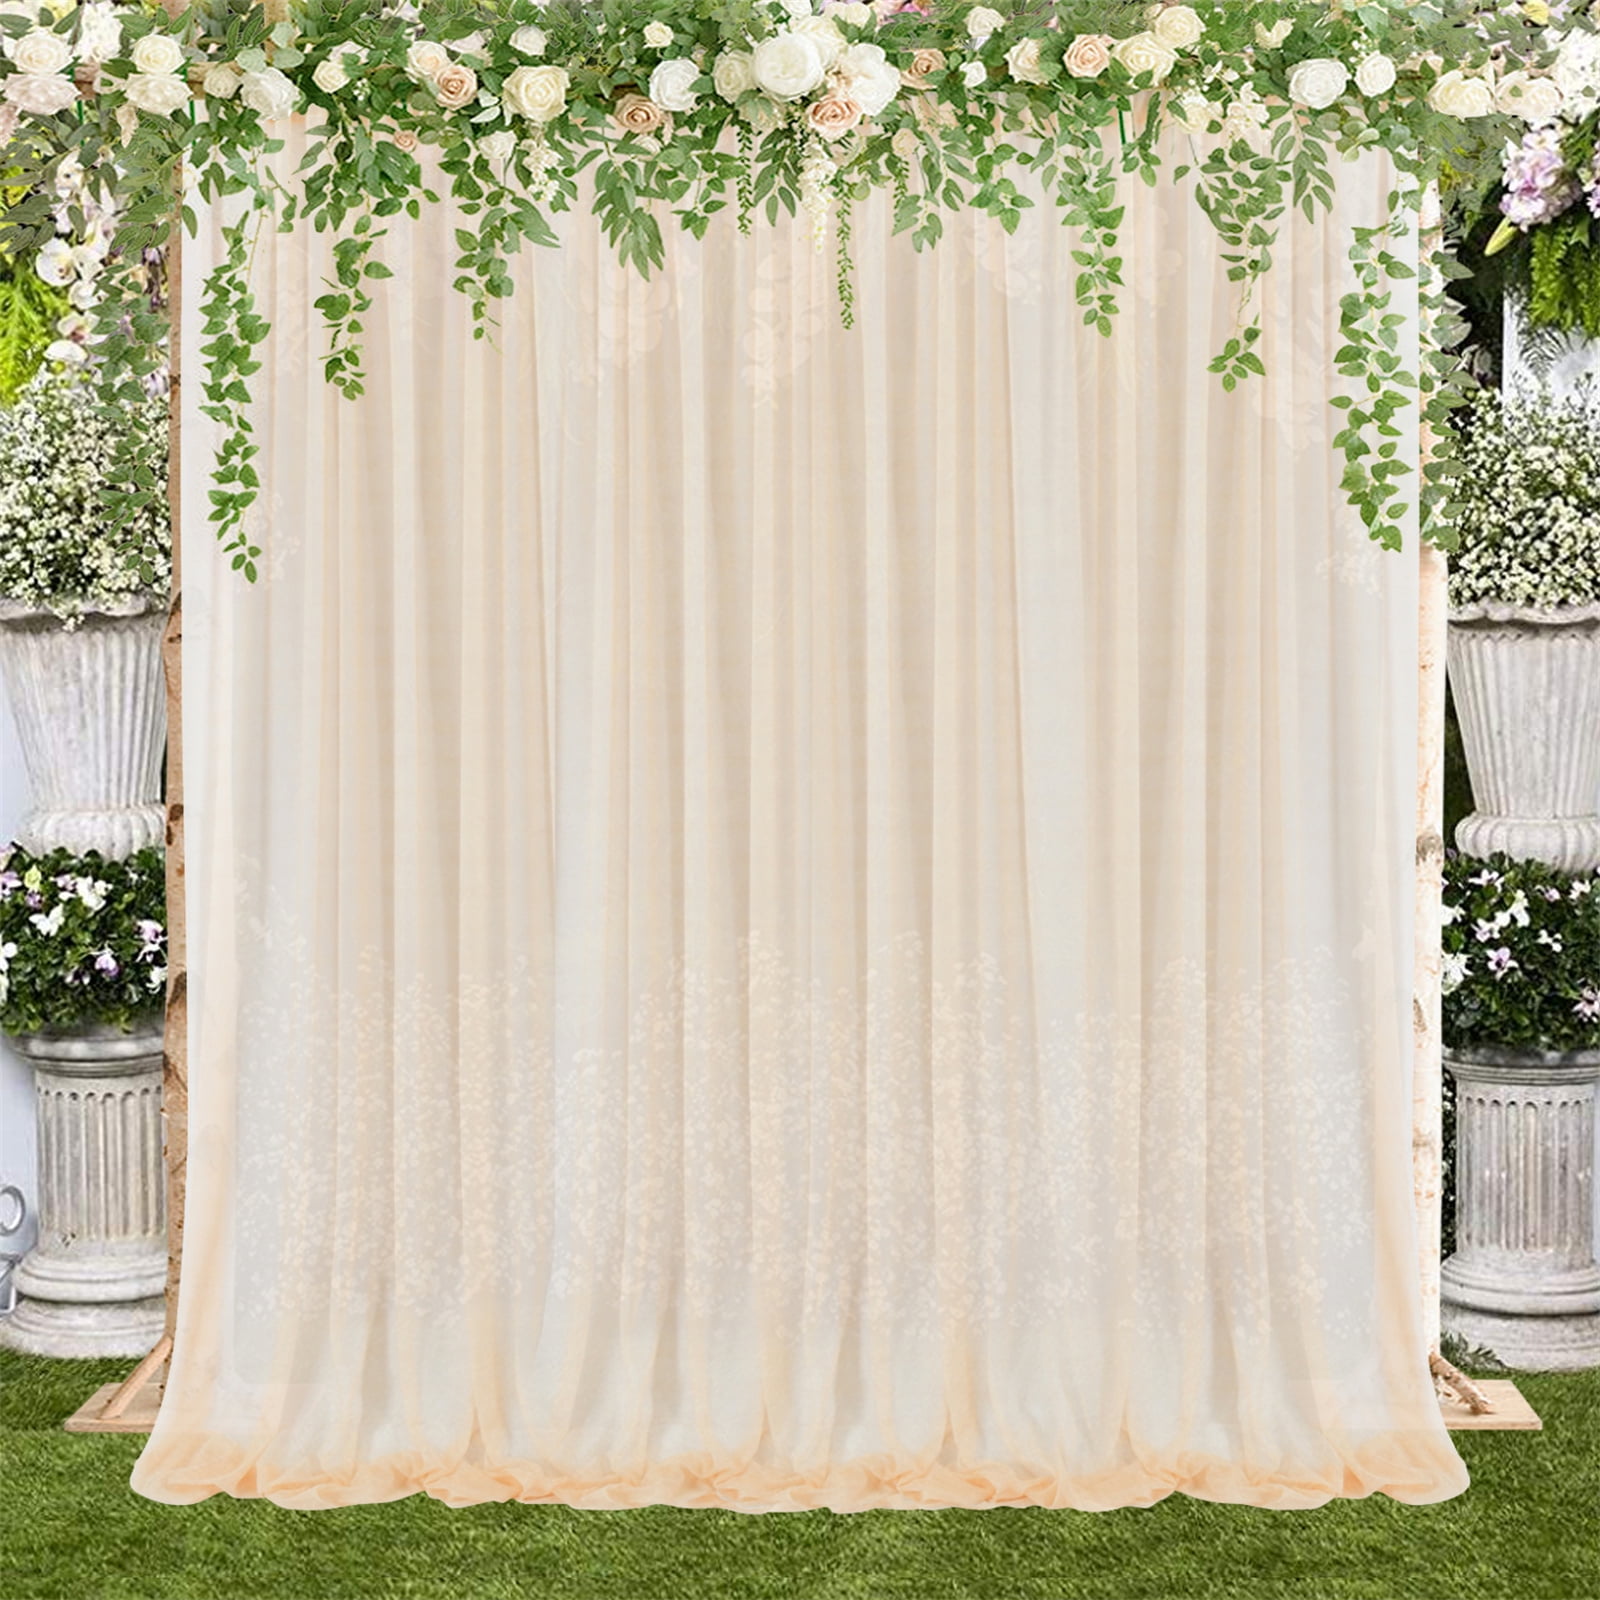 Yuedong 1Piece Wedding Arch Drapery Backdrop Curtain 